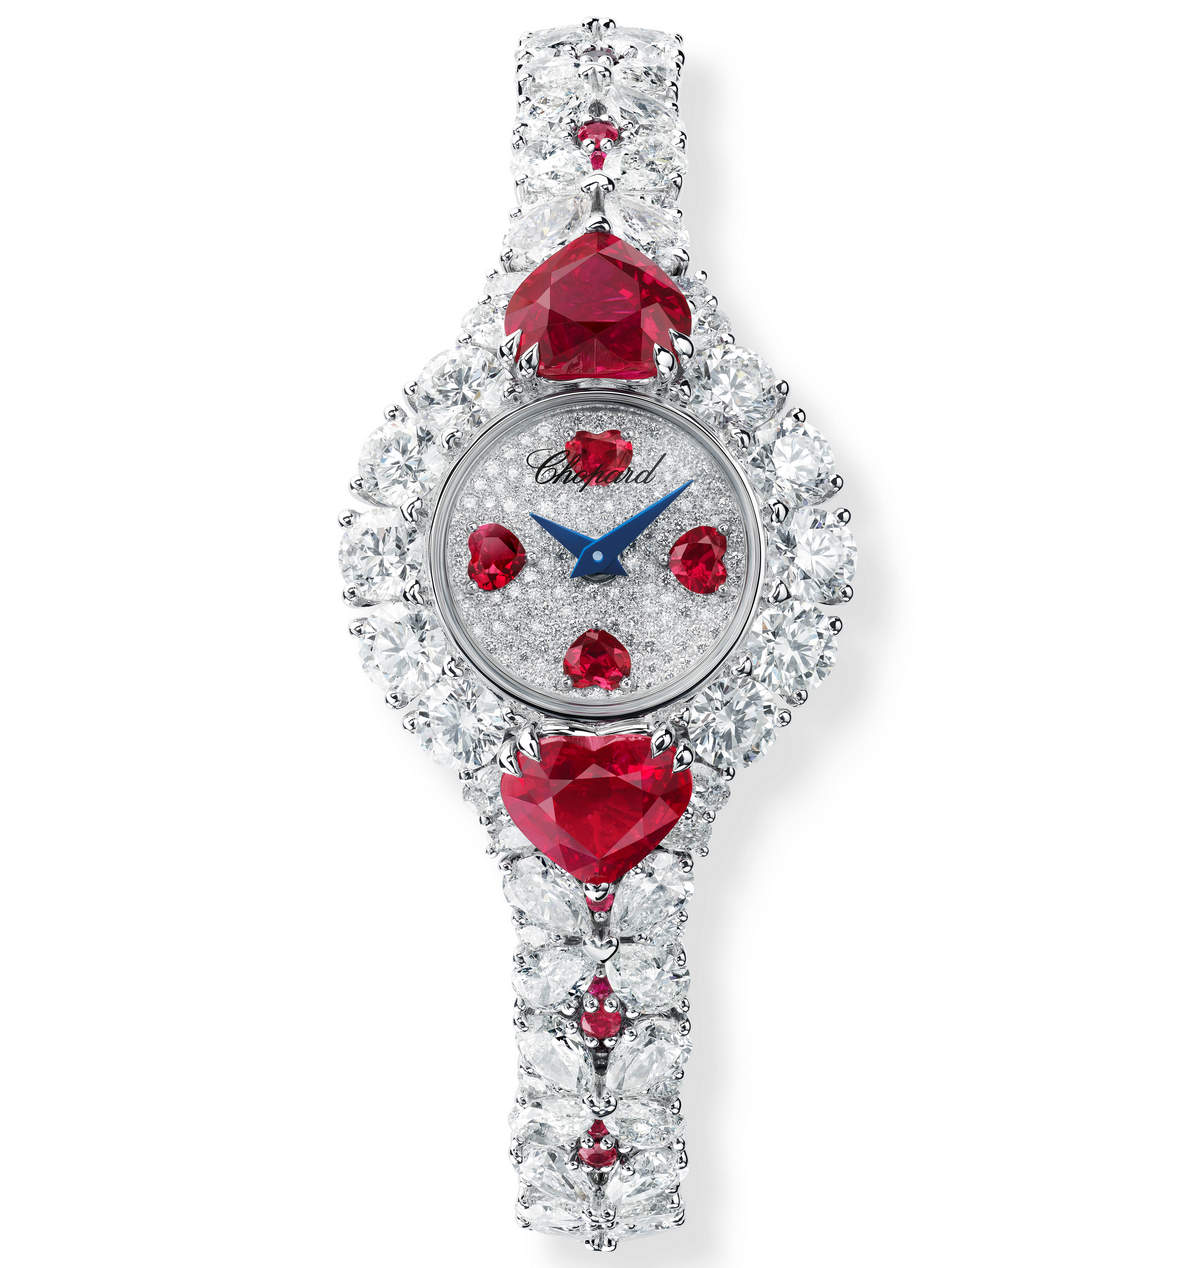 Chopard Presented Two New High Jewellery Collections at the Cannes